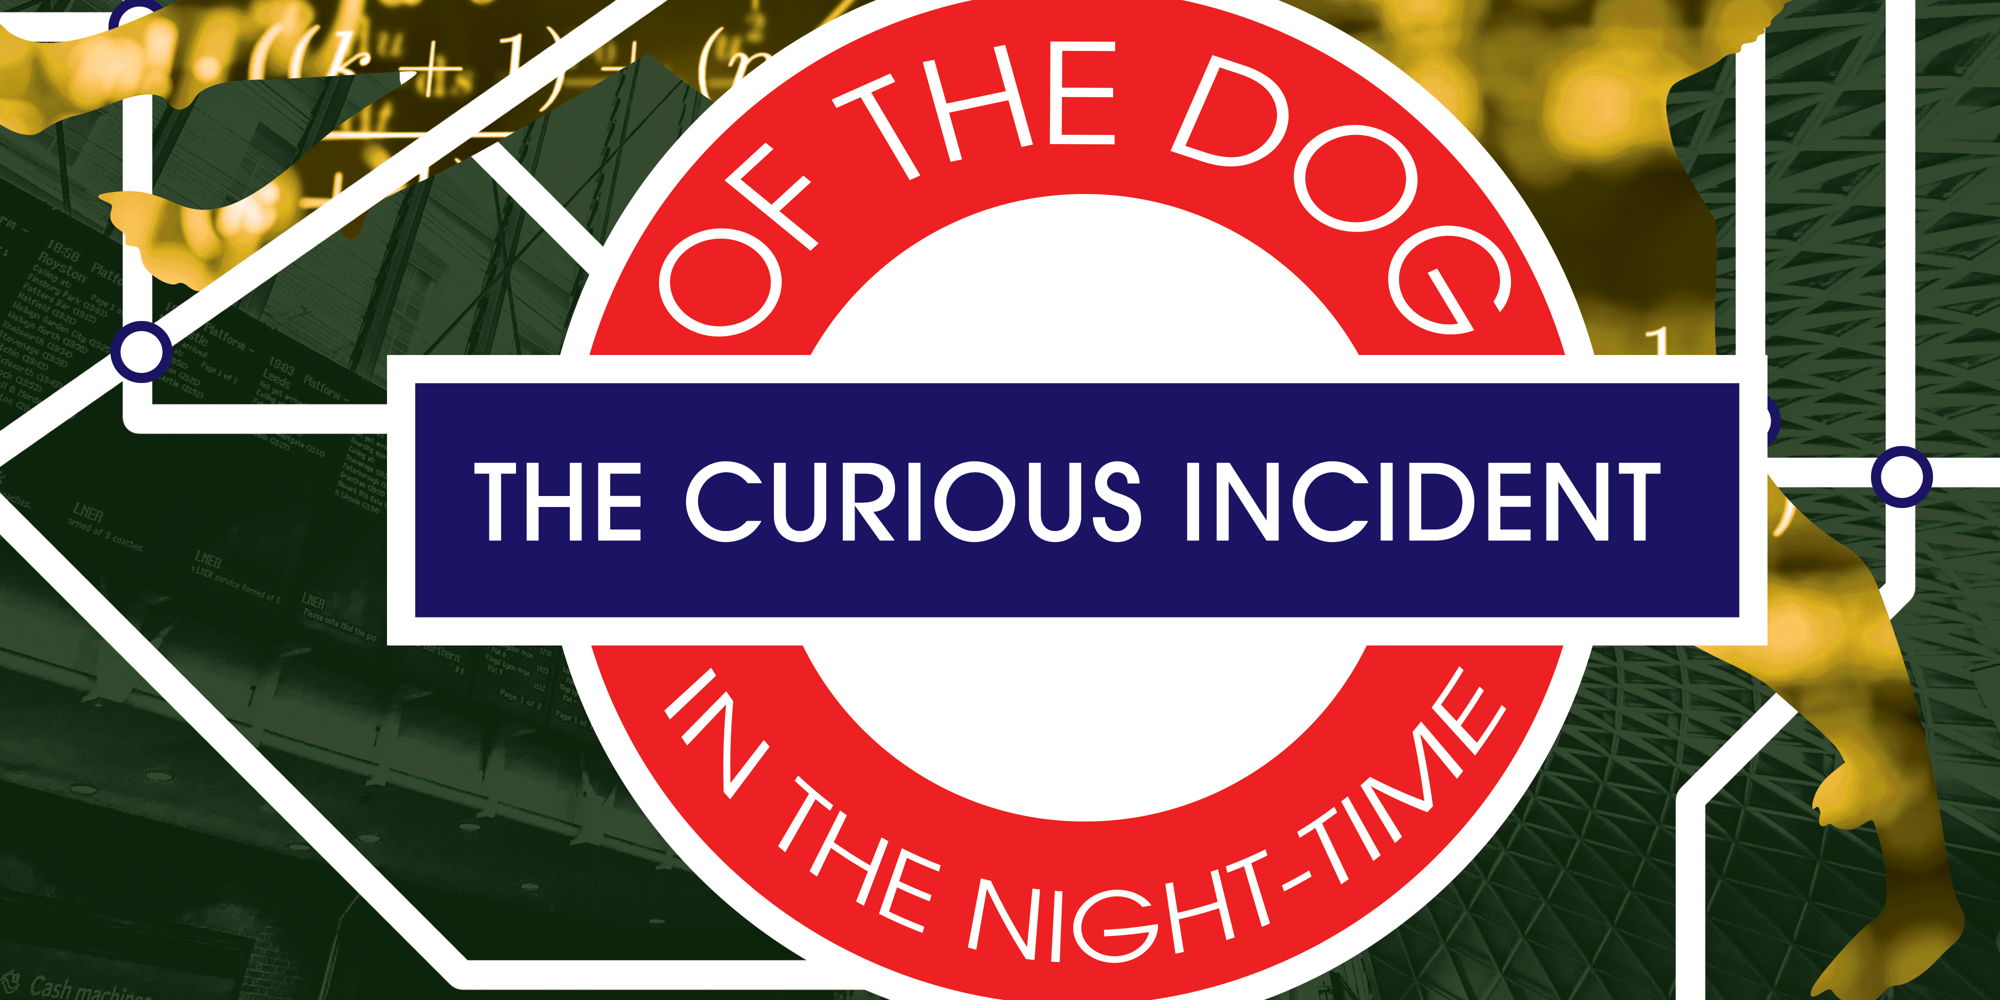 The Curious Incident of the Dog in the Night-Time  promotional image